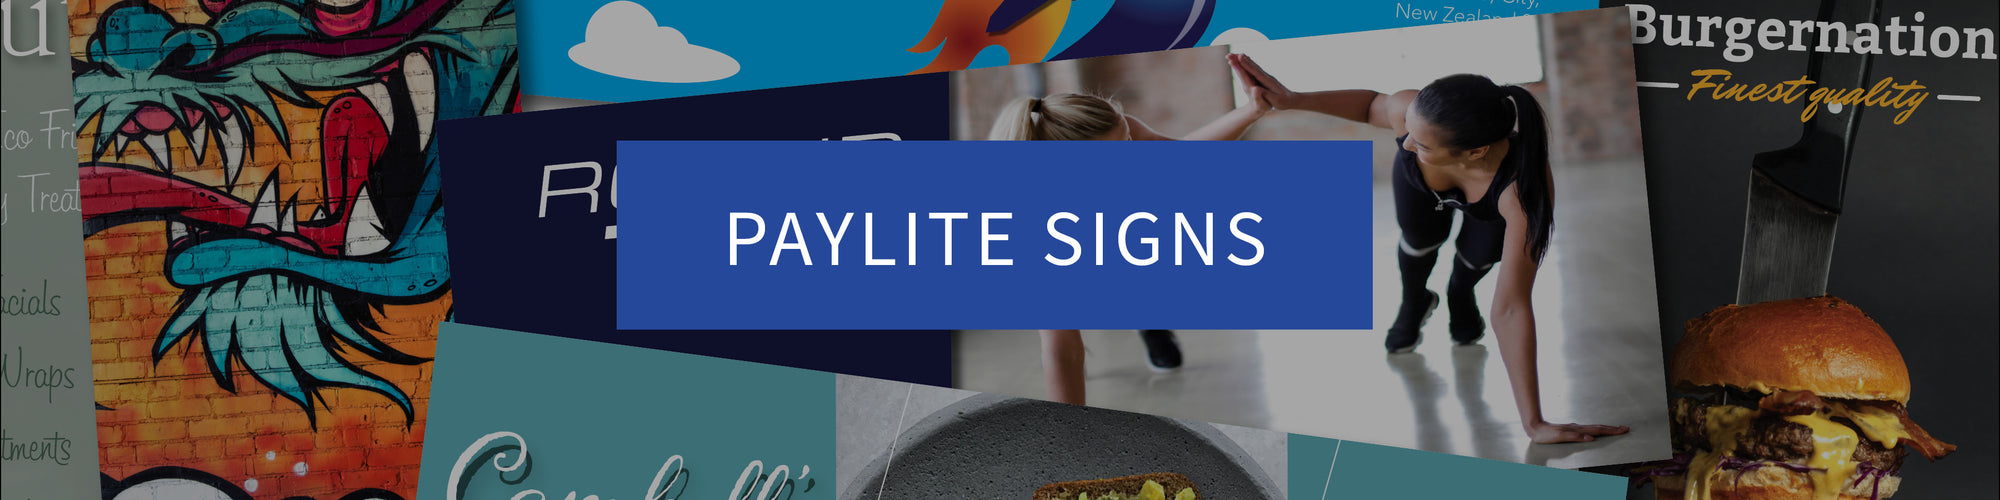 Paylite Signs